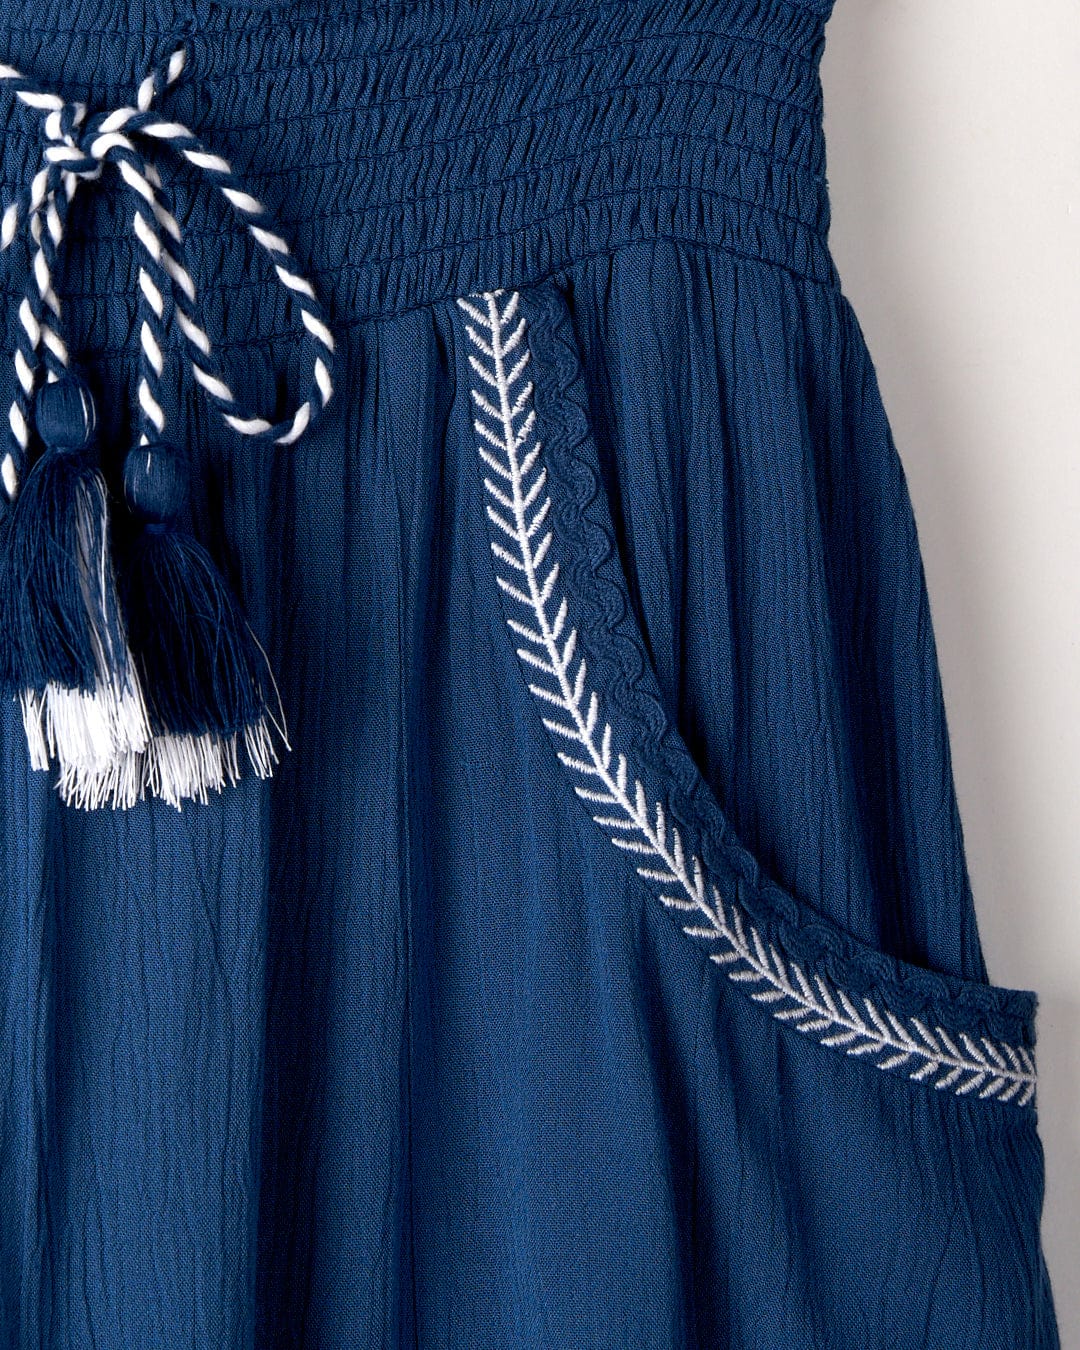 Close-up of the top of the Jonie - Womens Trouser - Blue from Saltrock, made from lightweight crinkle viscose, featuring a high waist drawstring with tassels and a simple white decorative zigzag trim along the pocket.